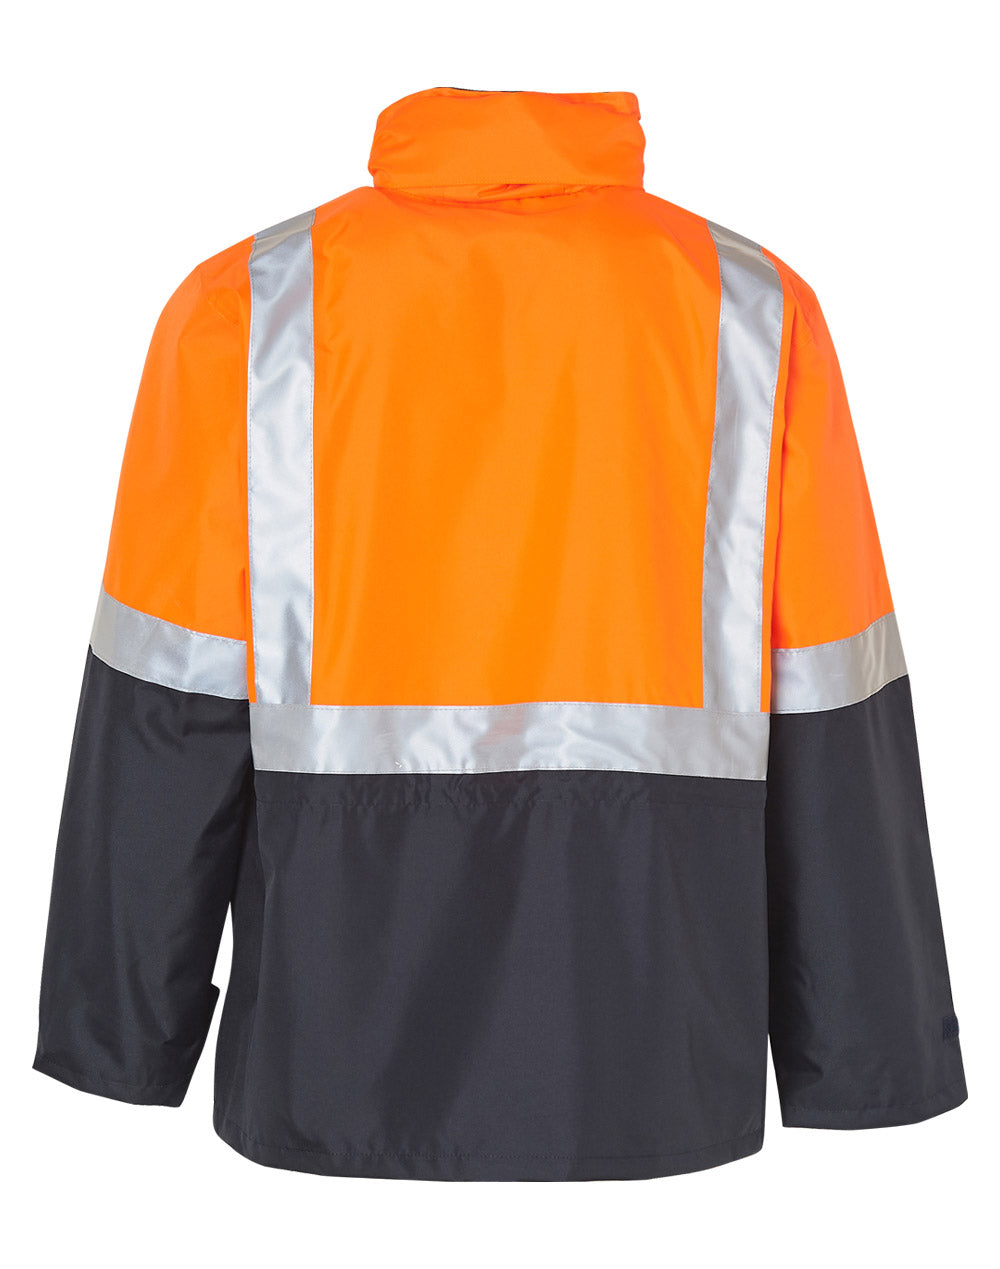 Hivis Day Night 3 In 1 Jacket - made by AIW